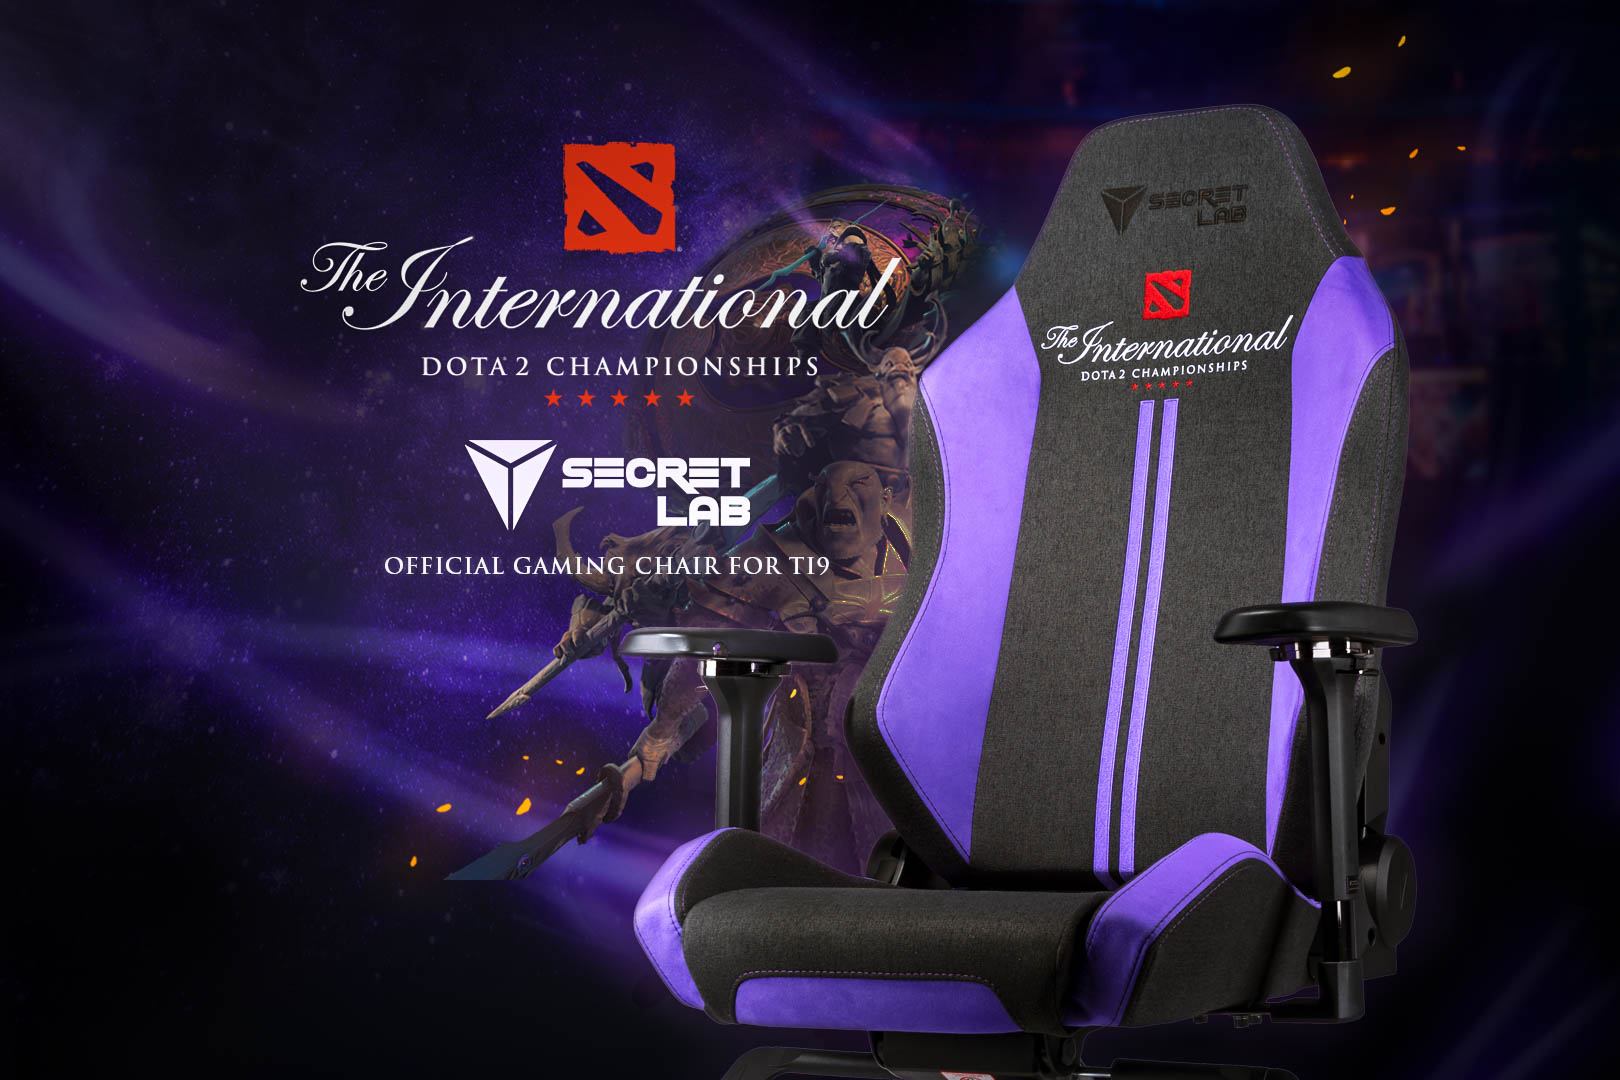 Secretlab-gaming seat of choice for The International 2019 and world’s first Dota 2 chair - Secretlab Blog